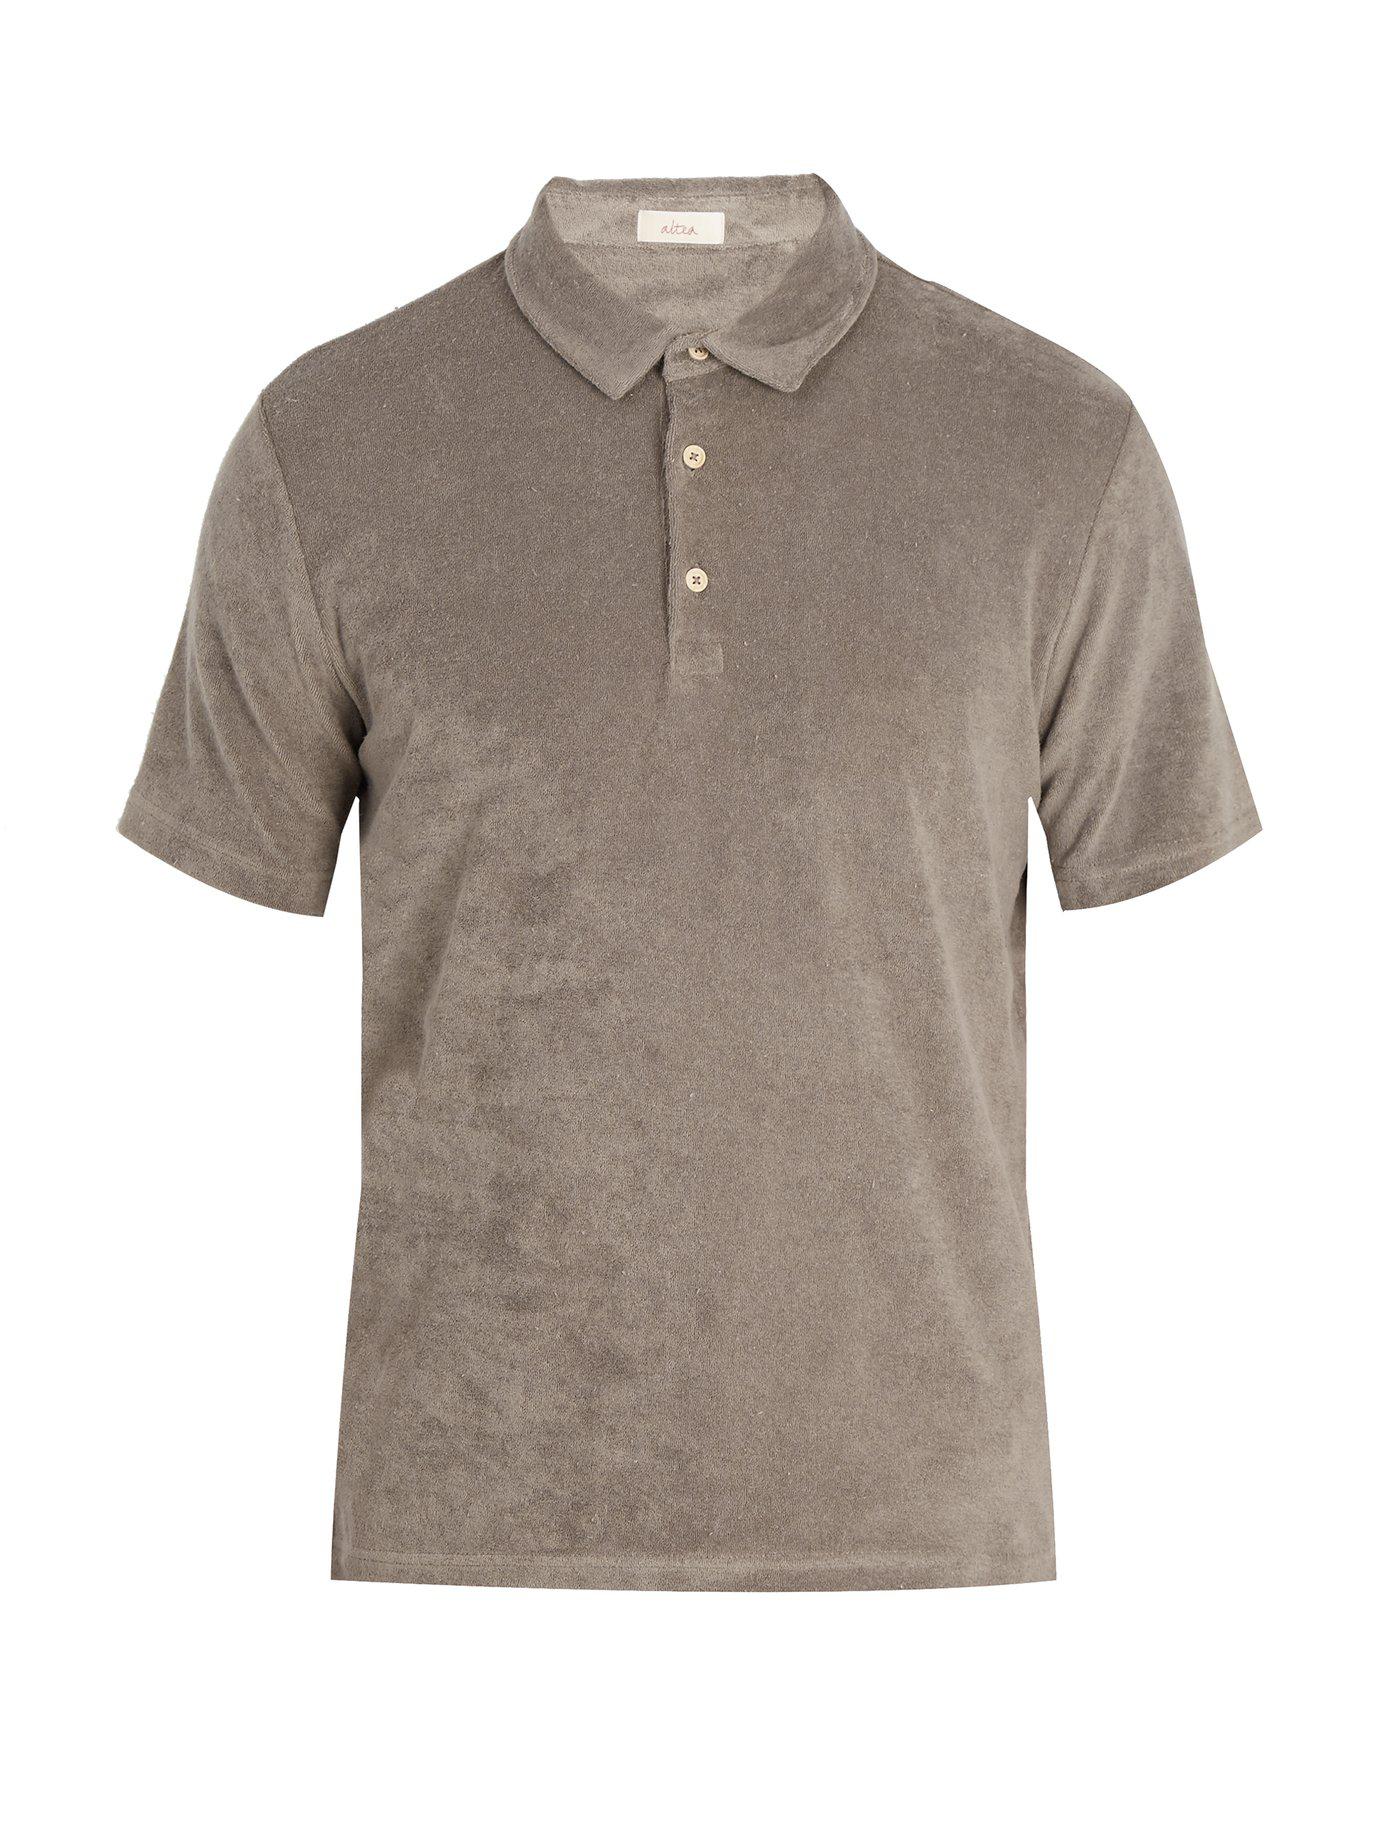 Altea Terry-towelling Cotton-blend Polo Shirt in Brown for Men - Lyst